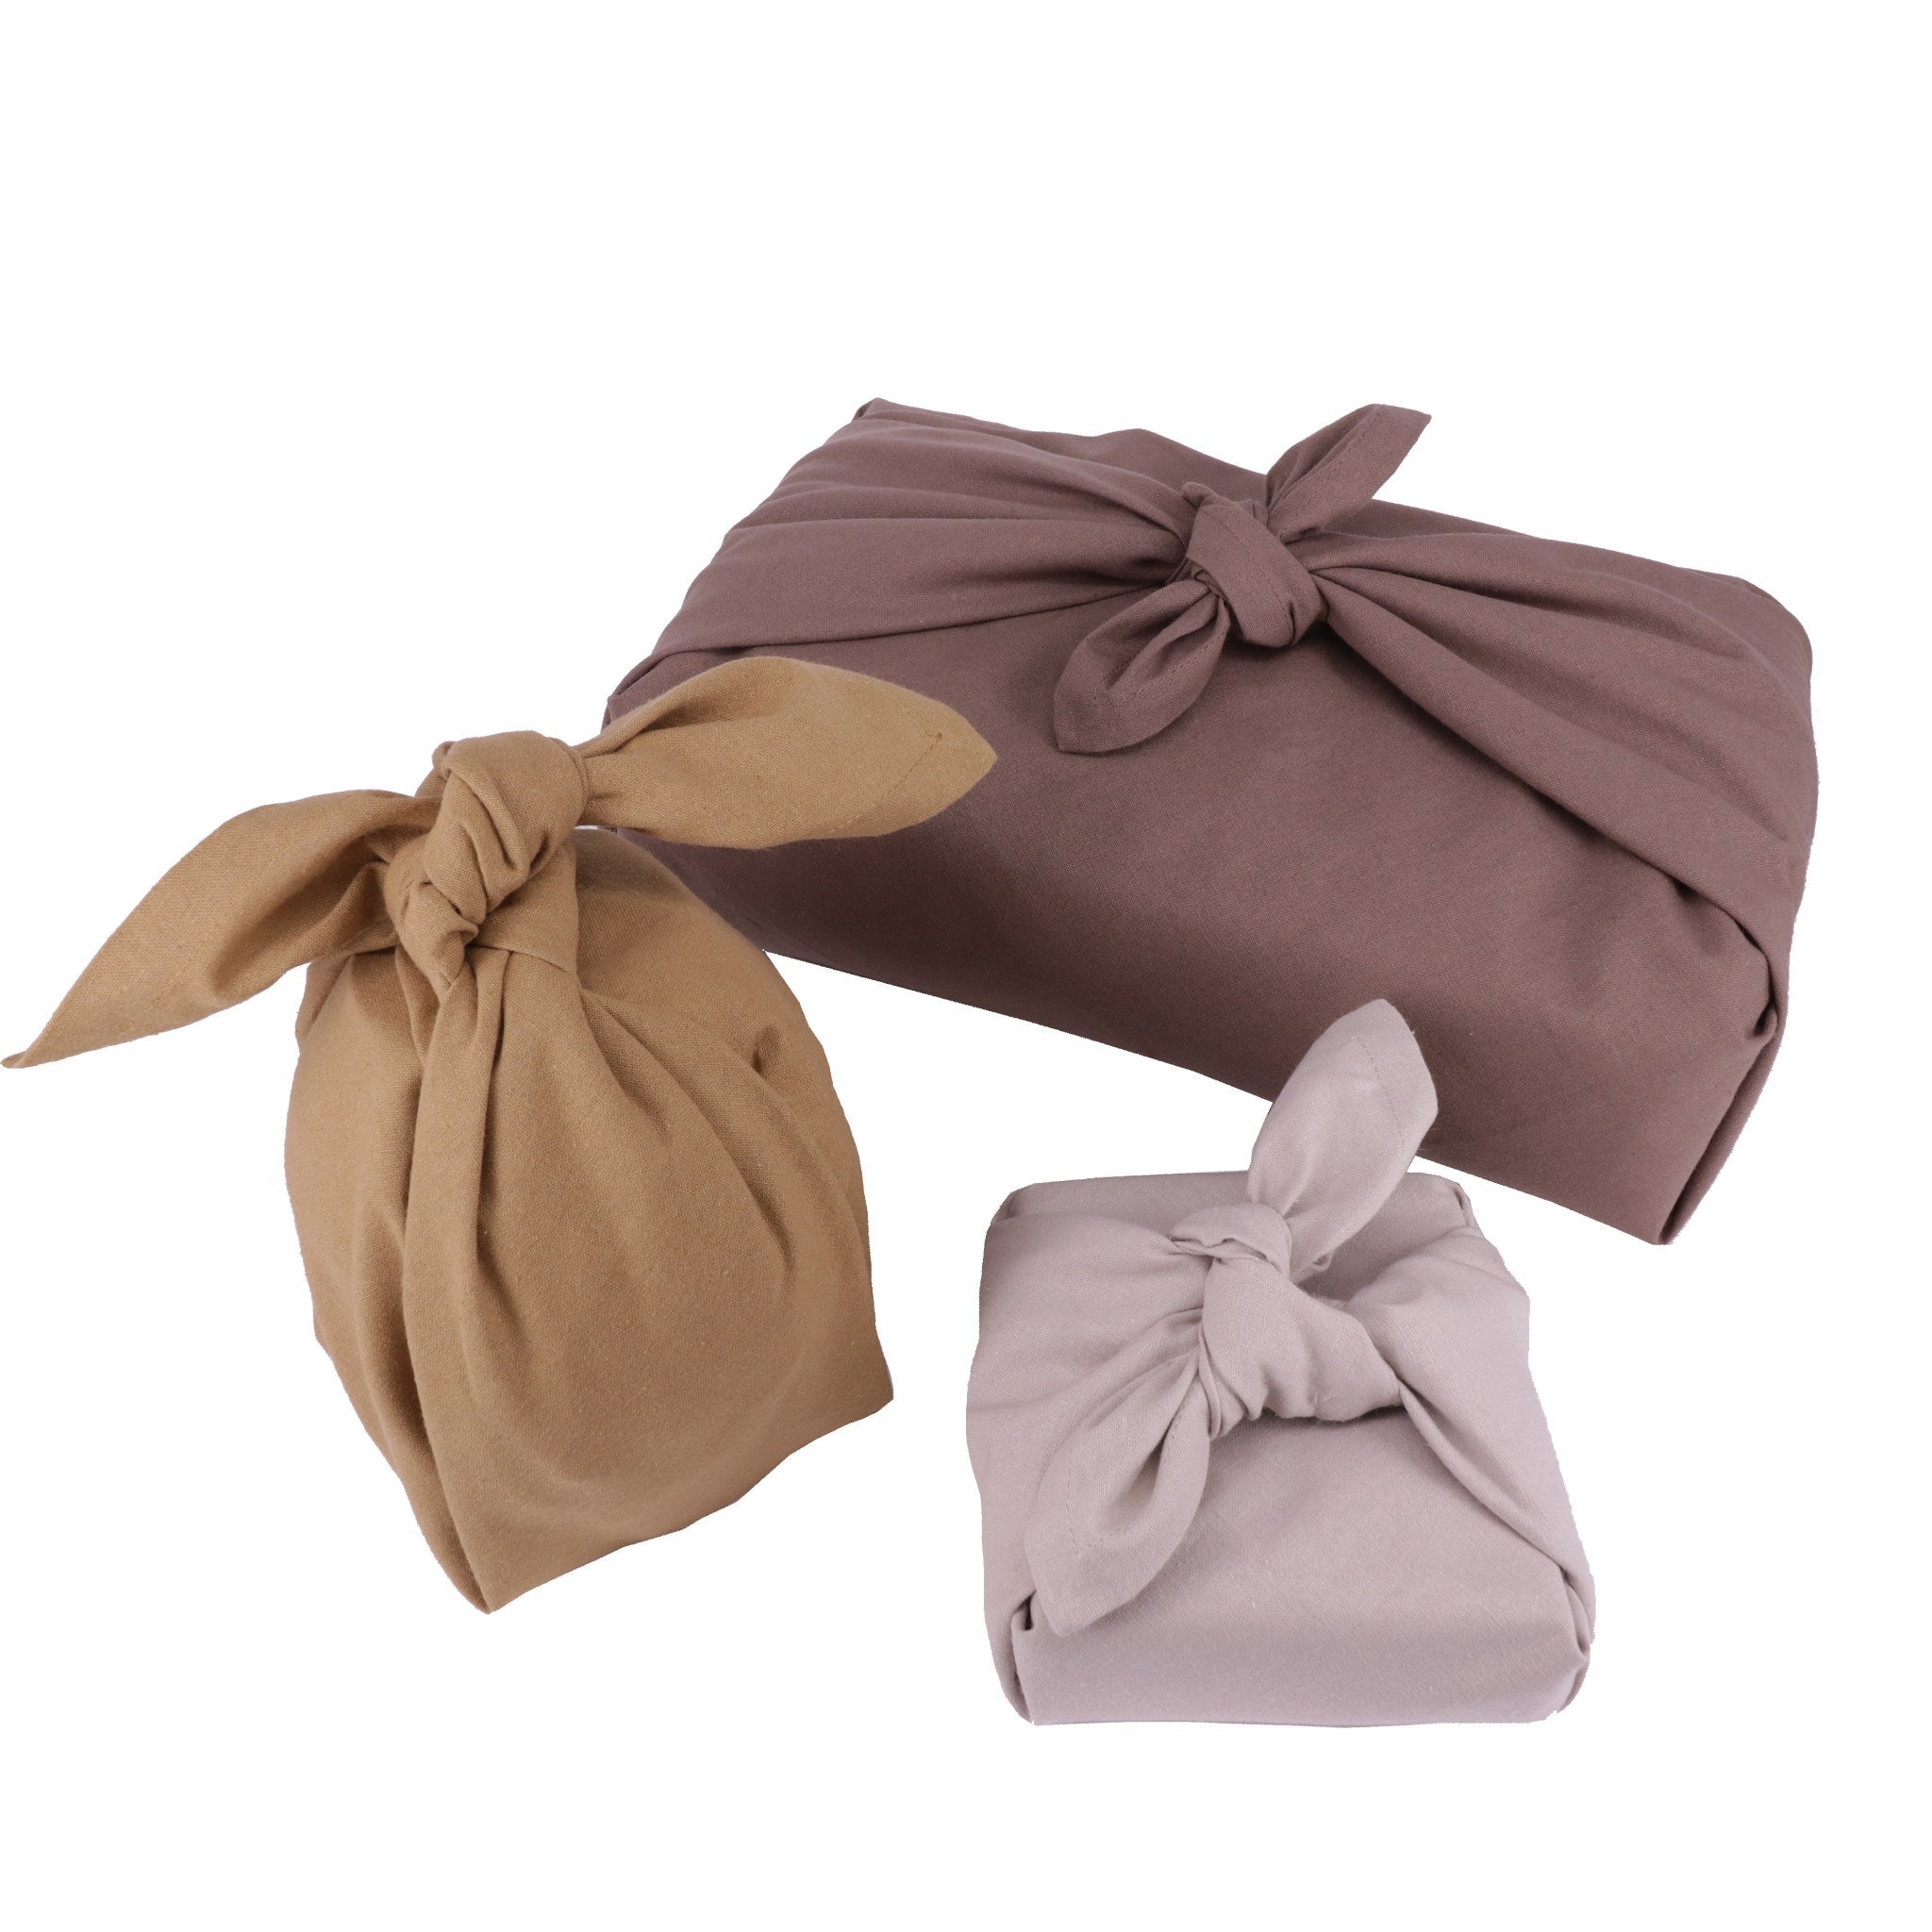 The Organic Company Gift Wrapping Set, Earth